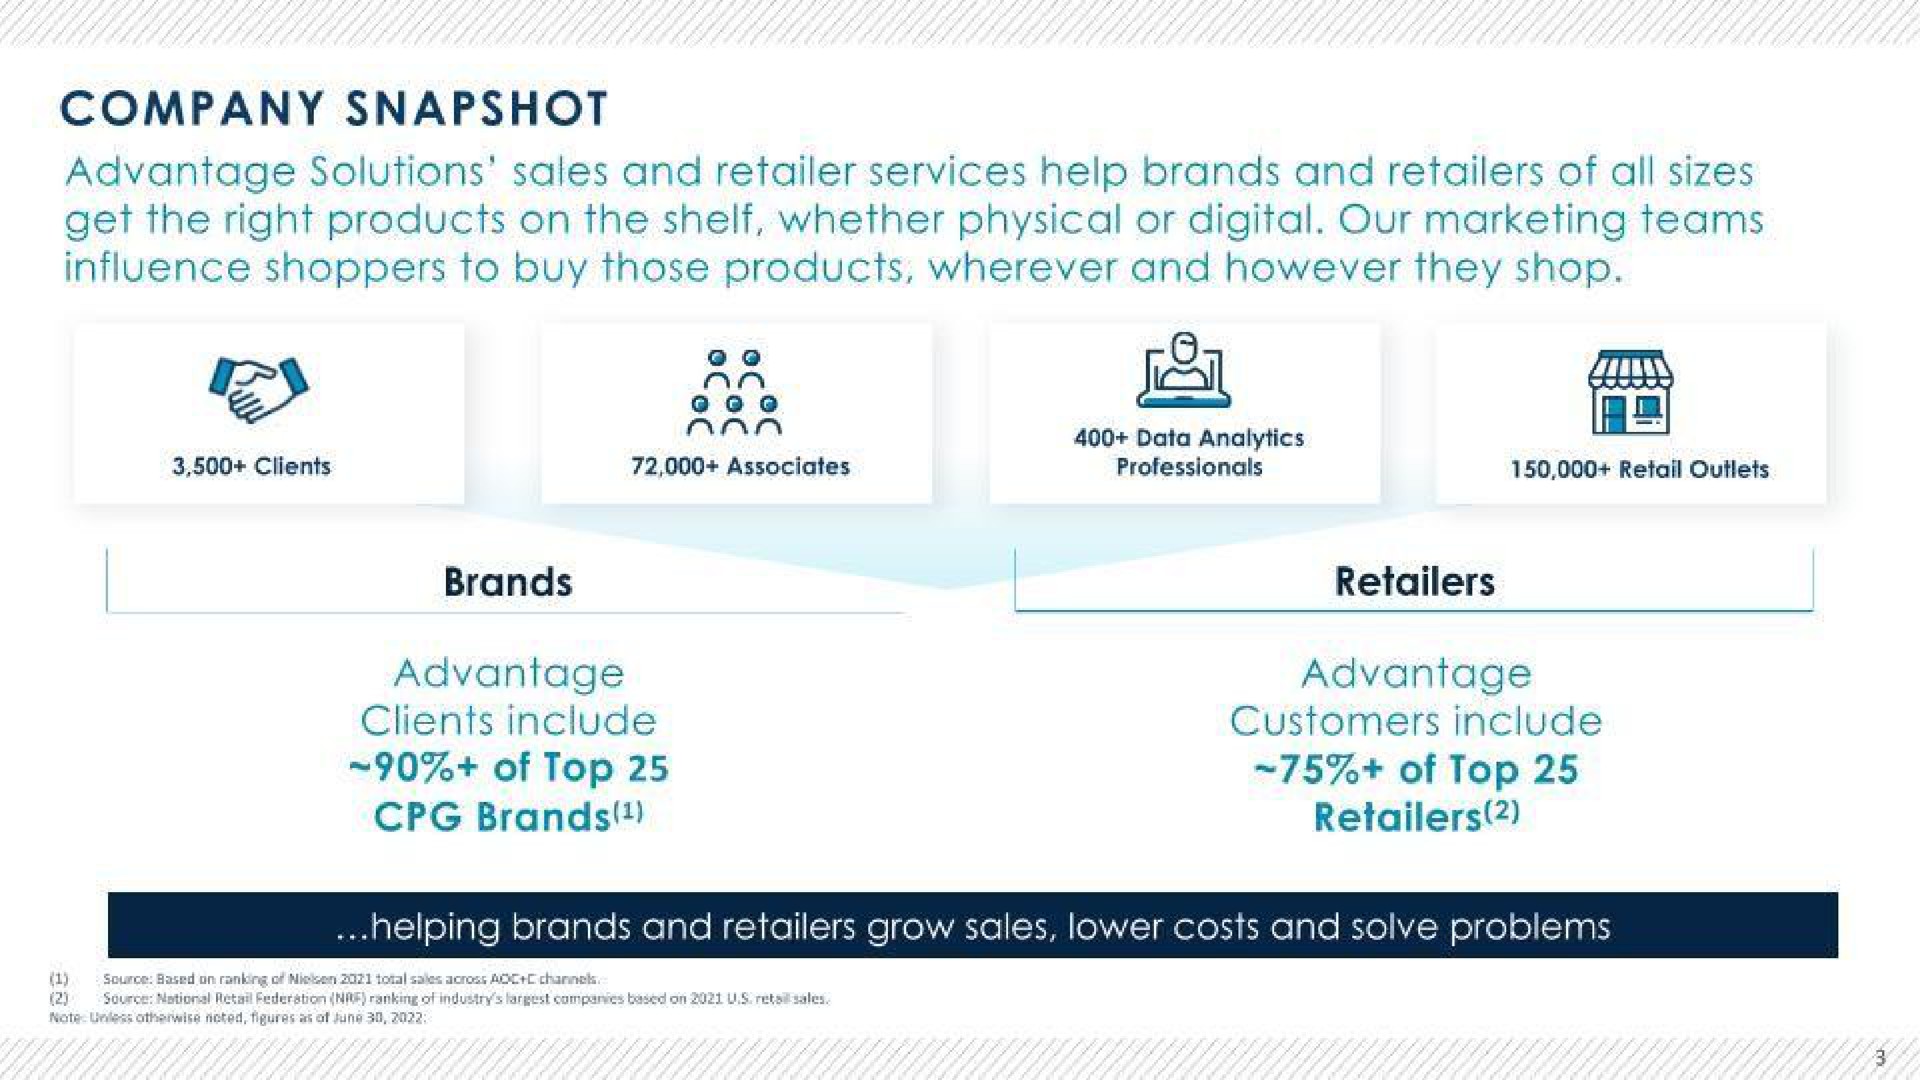 company snapshot solutions sales and retailer services help brands and retailers of all sizes get the right products on the shelf whether physical or digital our marketing teams influence shoppers to buy those products wherever and however they shop an peel eas brands advantage clients include of top brands retailers advantage customers include of top retailers sales lower costs and solve problems | Advantage Solutions